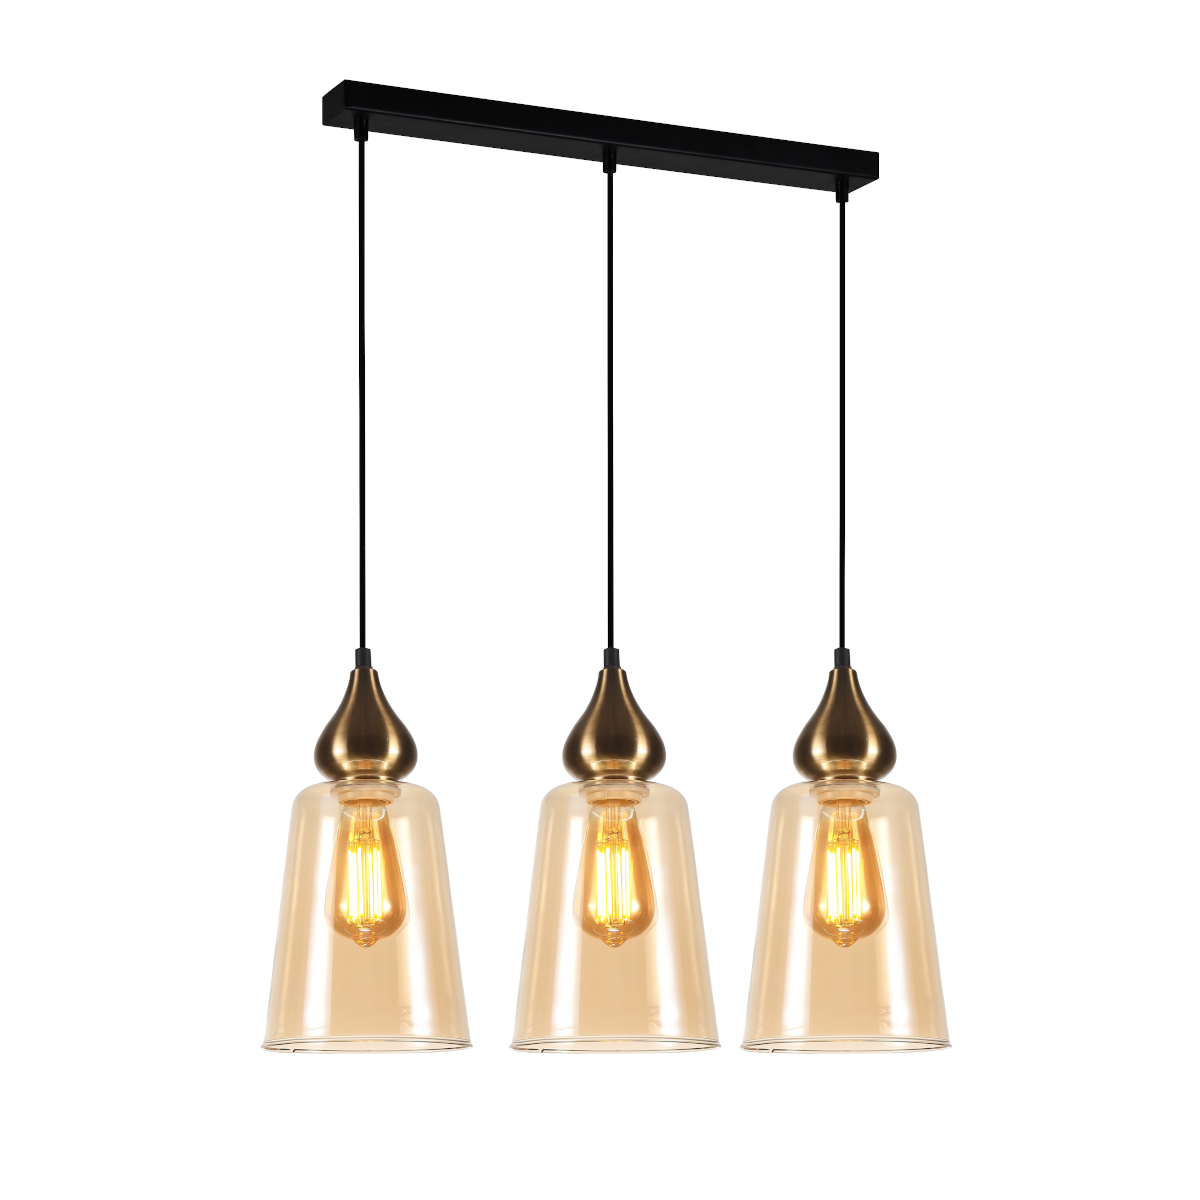 Product image of Jerez 3 Amber Glass Pendants with Linear Base with lights on